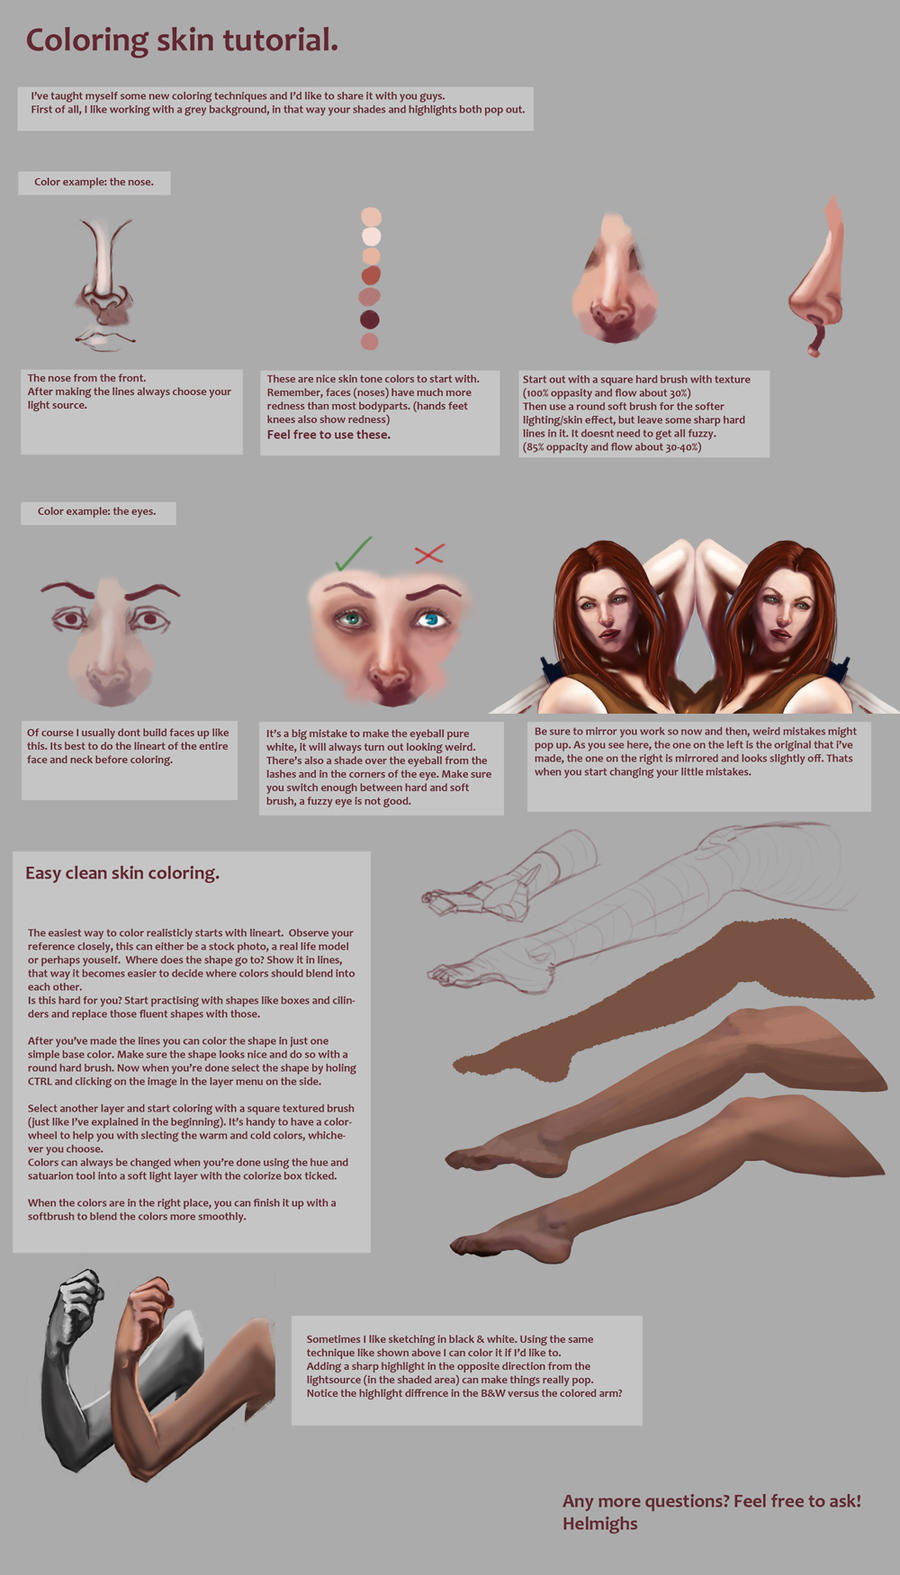 Skin coloring tutorial. by Suzanne-Helmigh on DeviantArt